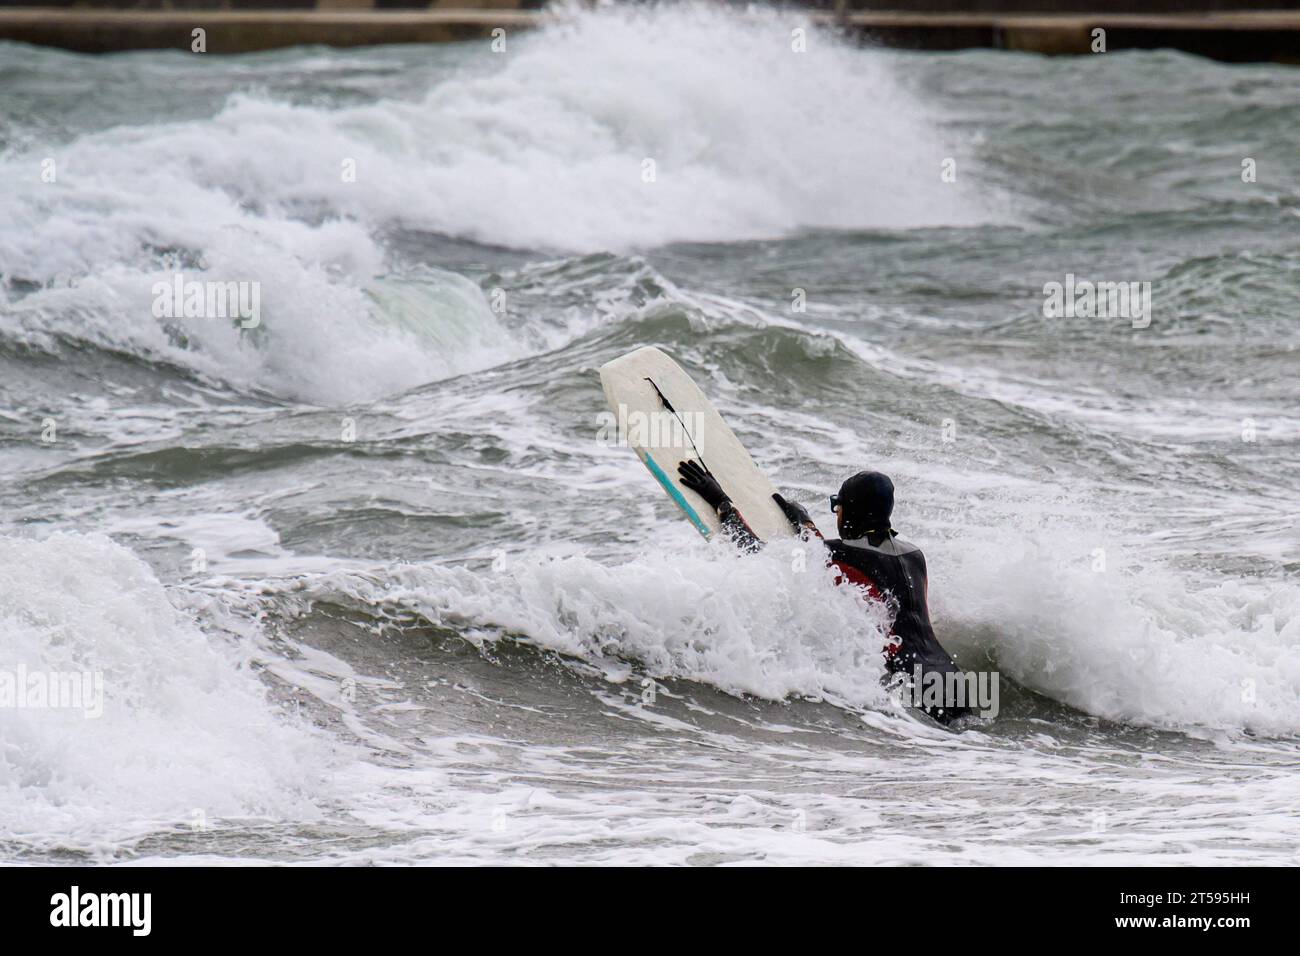 Croatia, Split, 031123. The stormy south changed to a southwesterly wind and created large waves that cause problems in maritime traffic and floods due to rising sea levels. In the photo: a brave surfer tries to overcome big waves along the coast of Bacvica. Photo: Tom Dubravec/CROPIX Split CROATIA Copyright: xxTomxDubravecx jugo lebicada bacvice1-031123 Credit: Imago/Alamy Live News Stock Photo